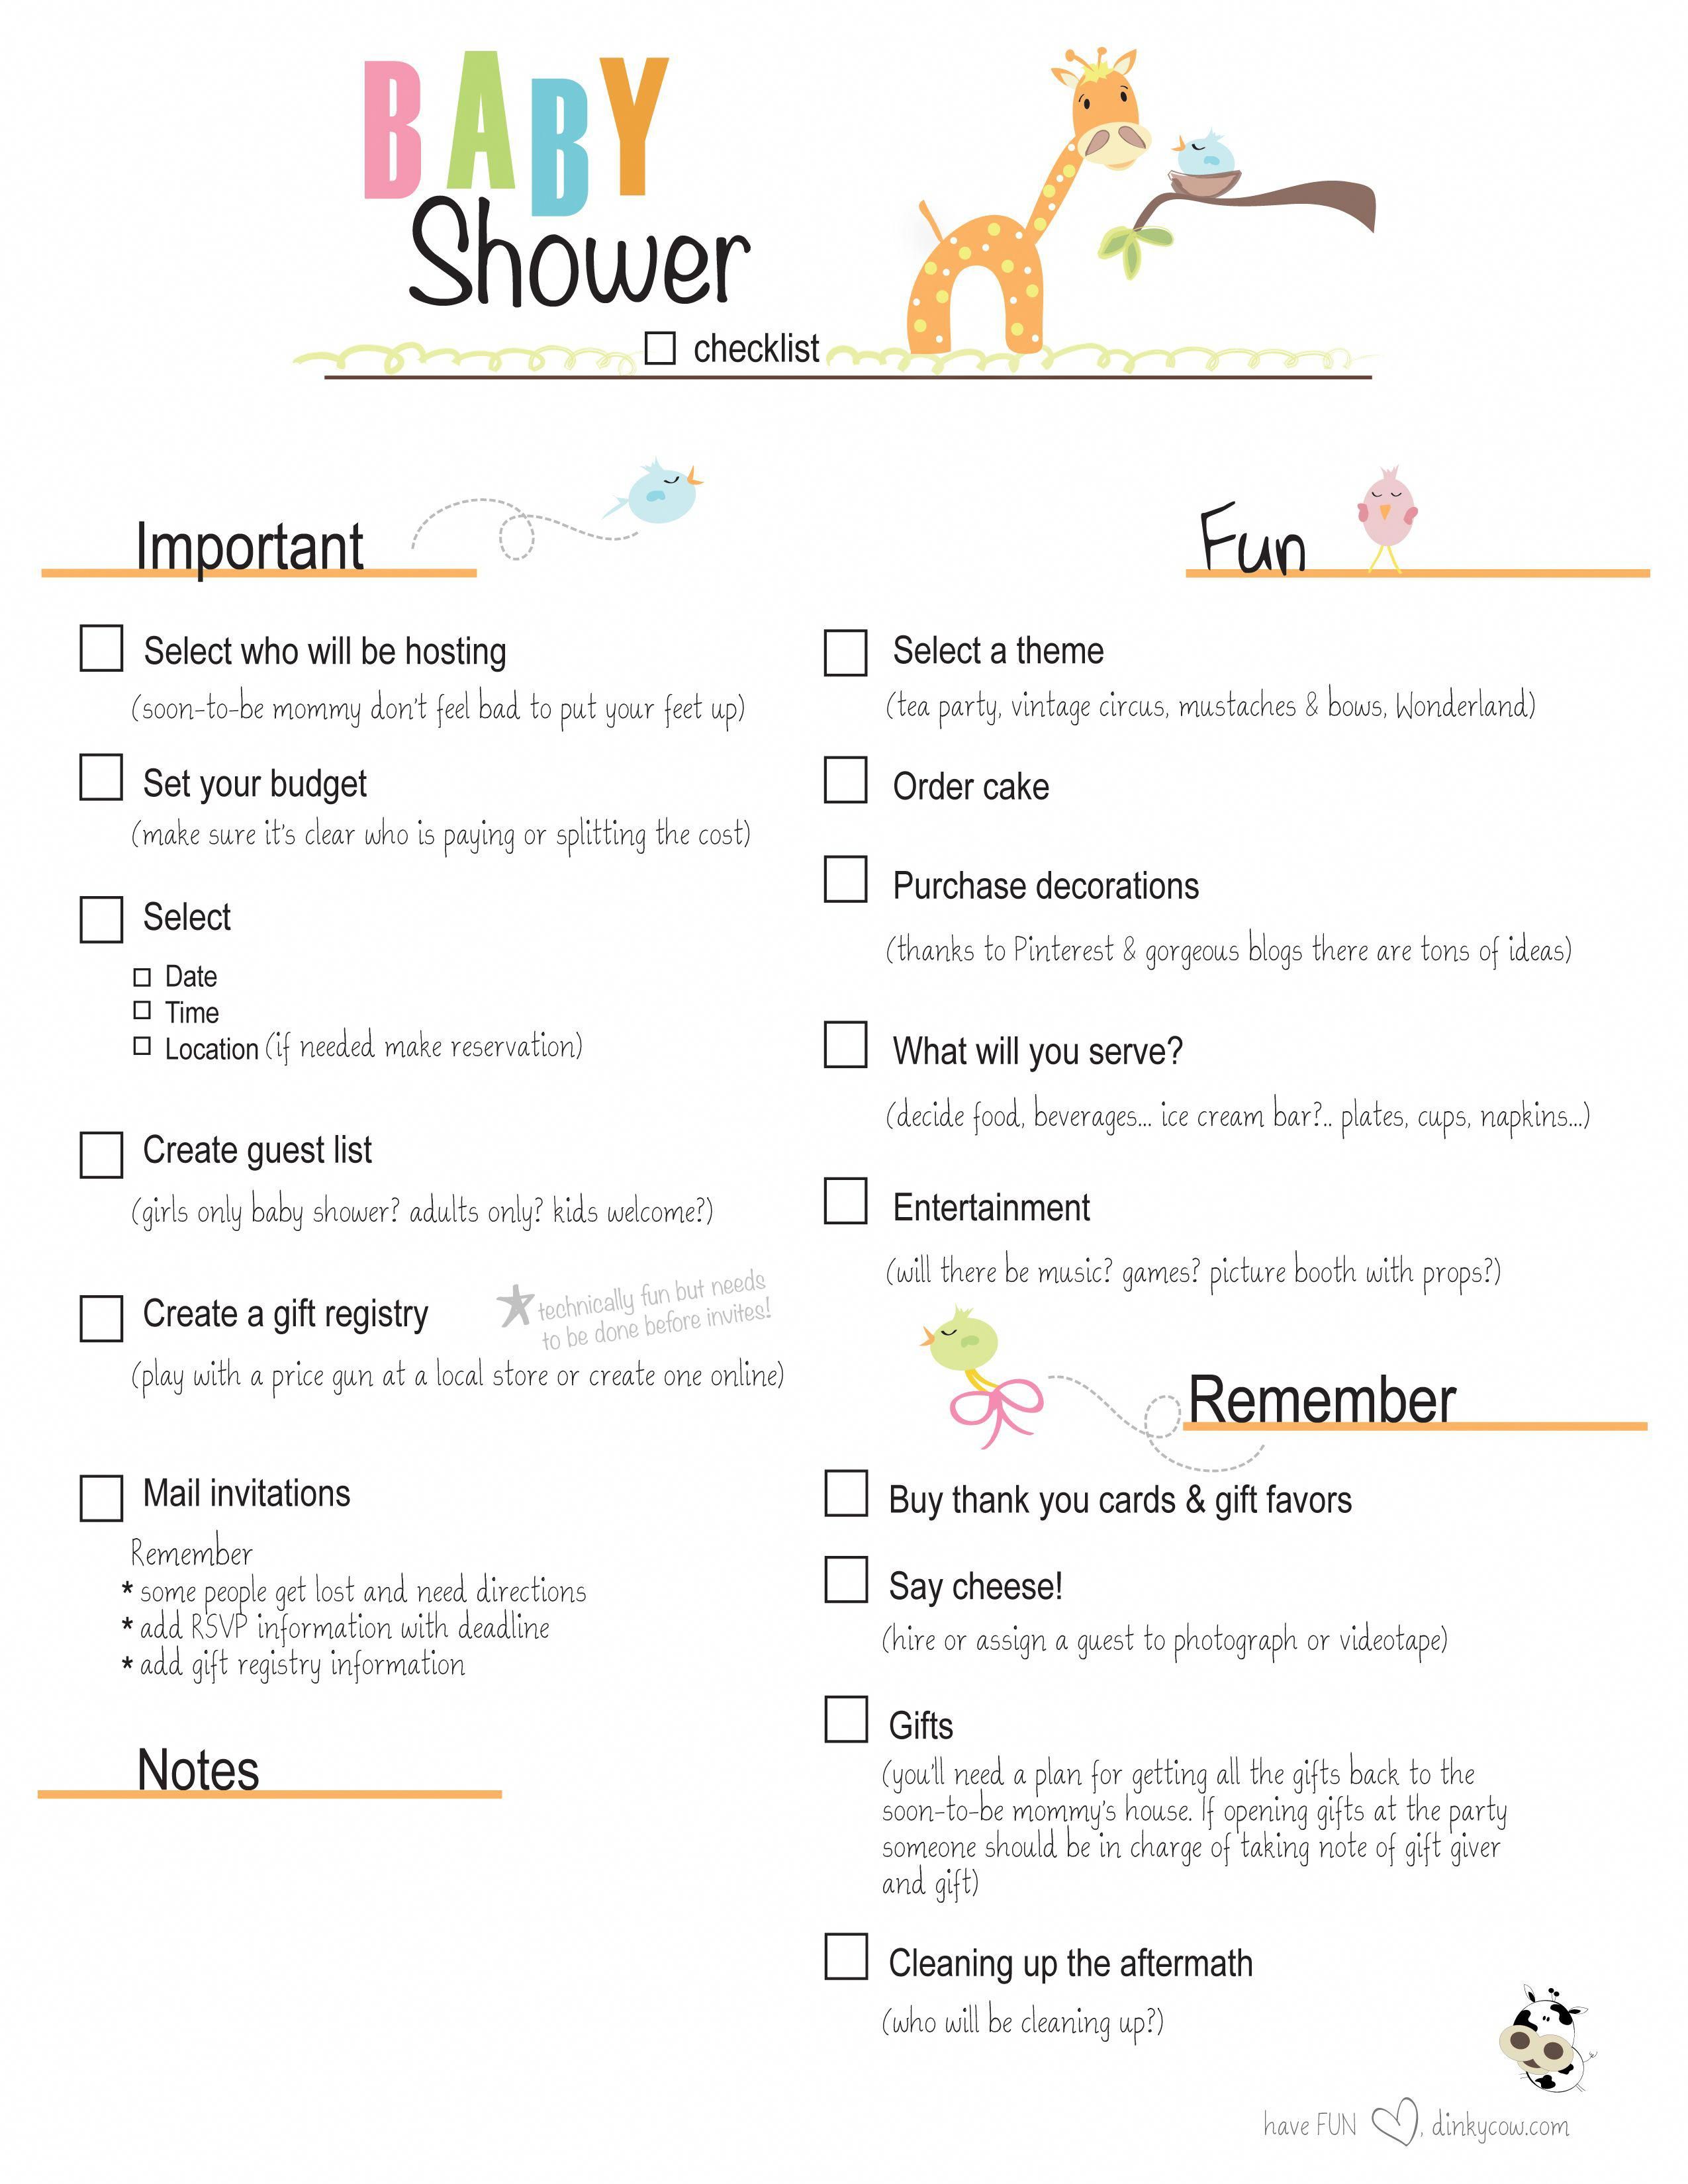 Free Printable Baby Shower Checklist |  paste the link below 